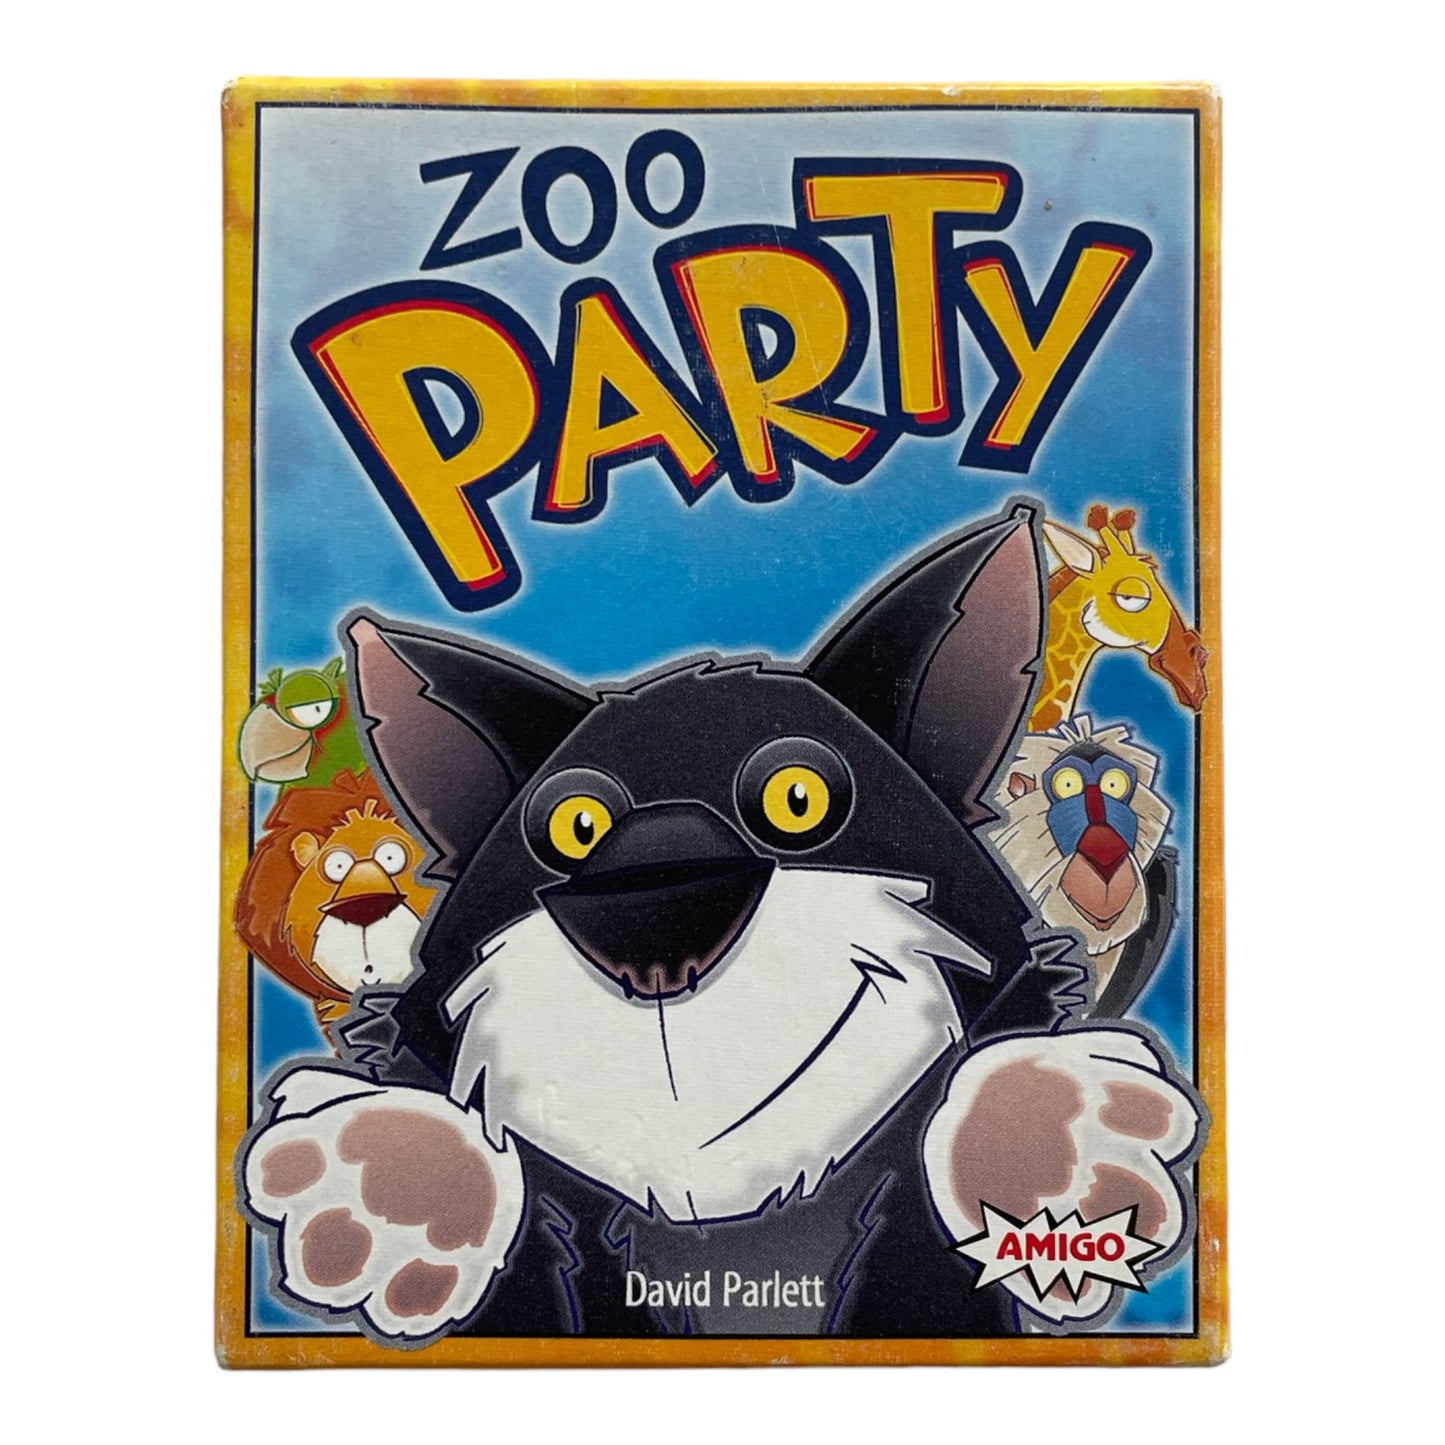 Zoo PARTY - The game